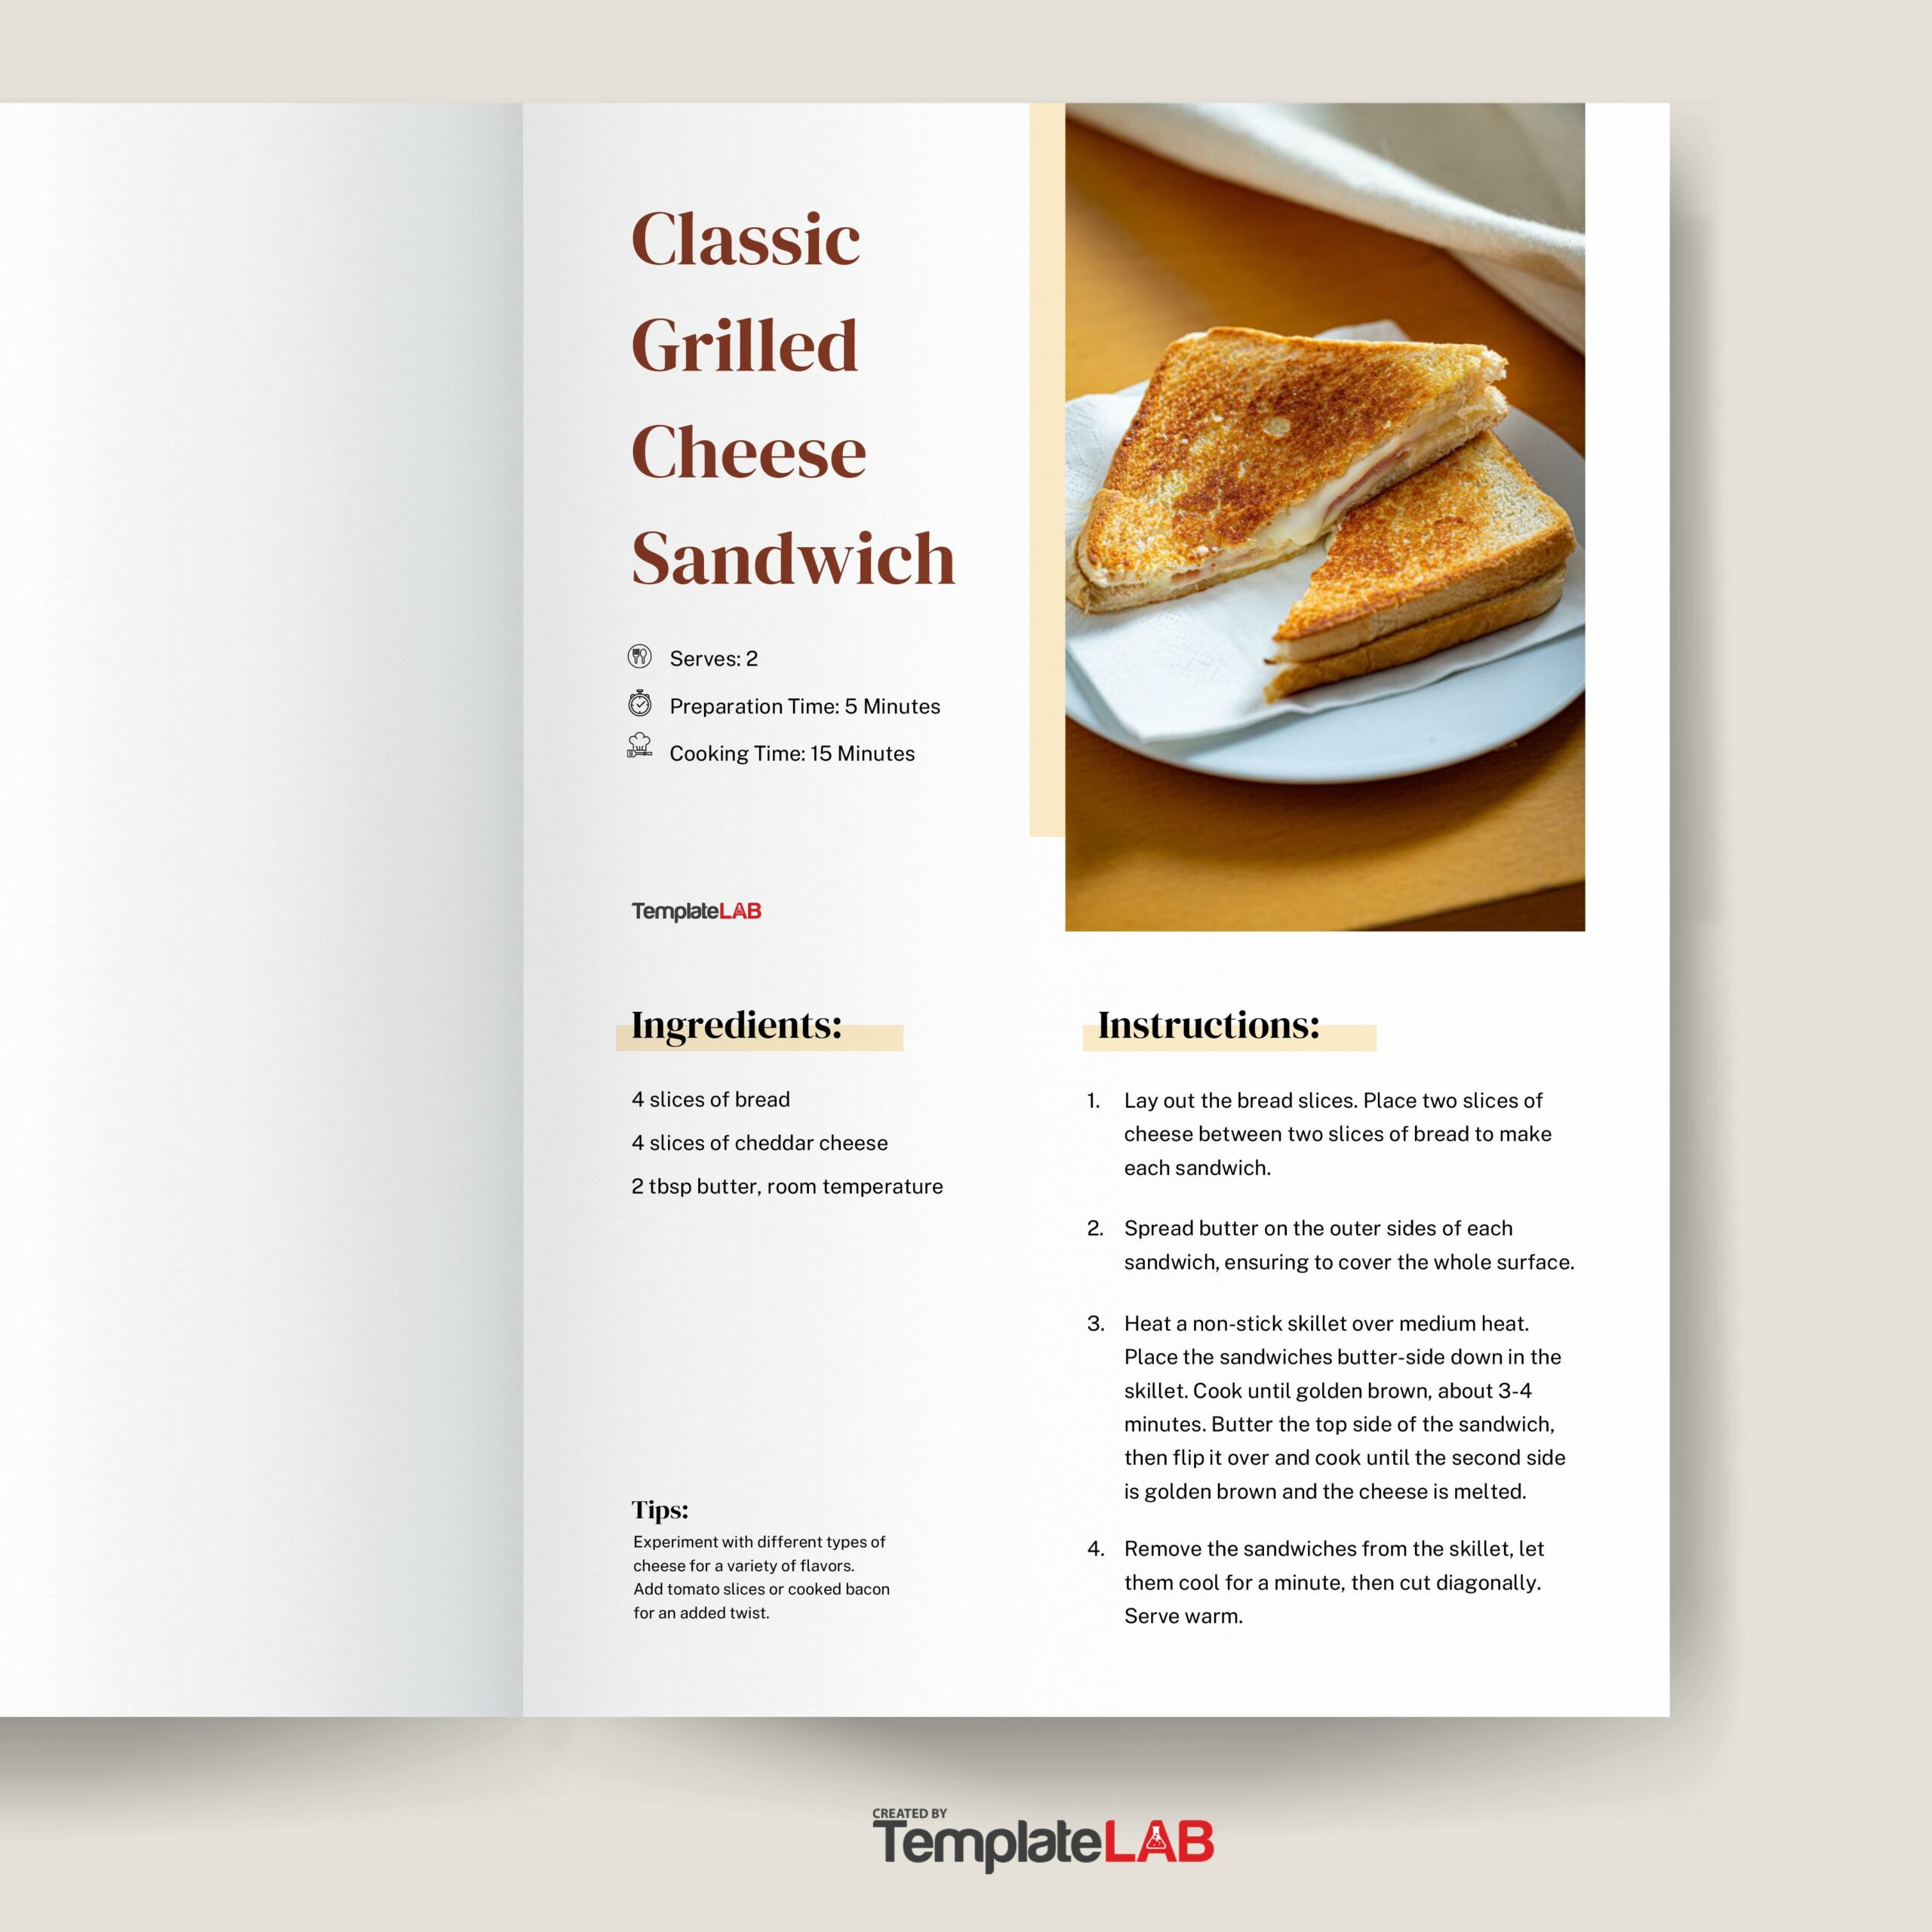 Make Your Own Cookbook With These Free Templates